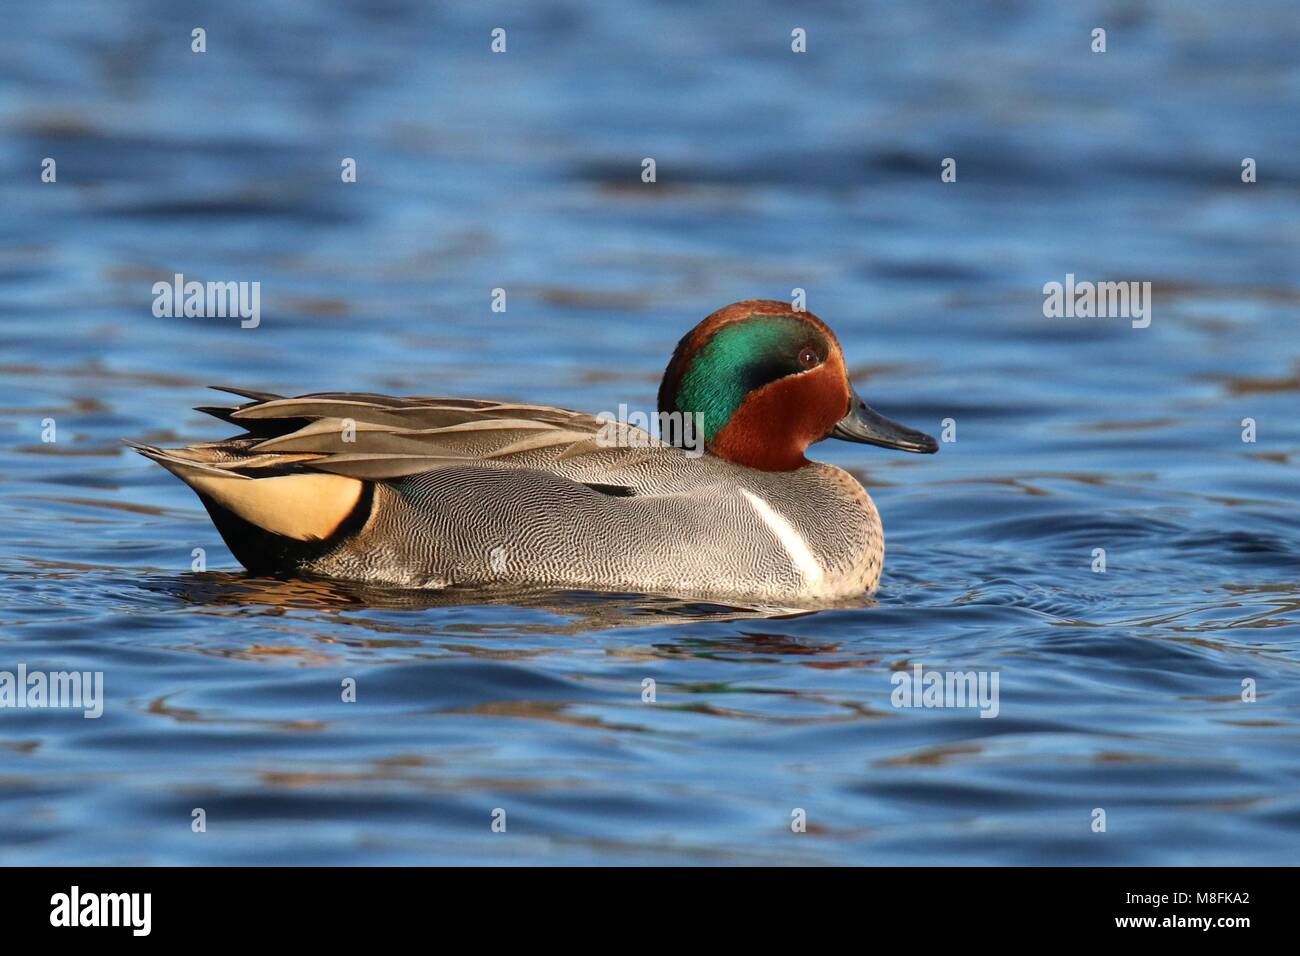 A male green winged teal Anas crecca swimming on a blue lake in winter Stock Photo